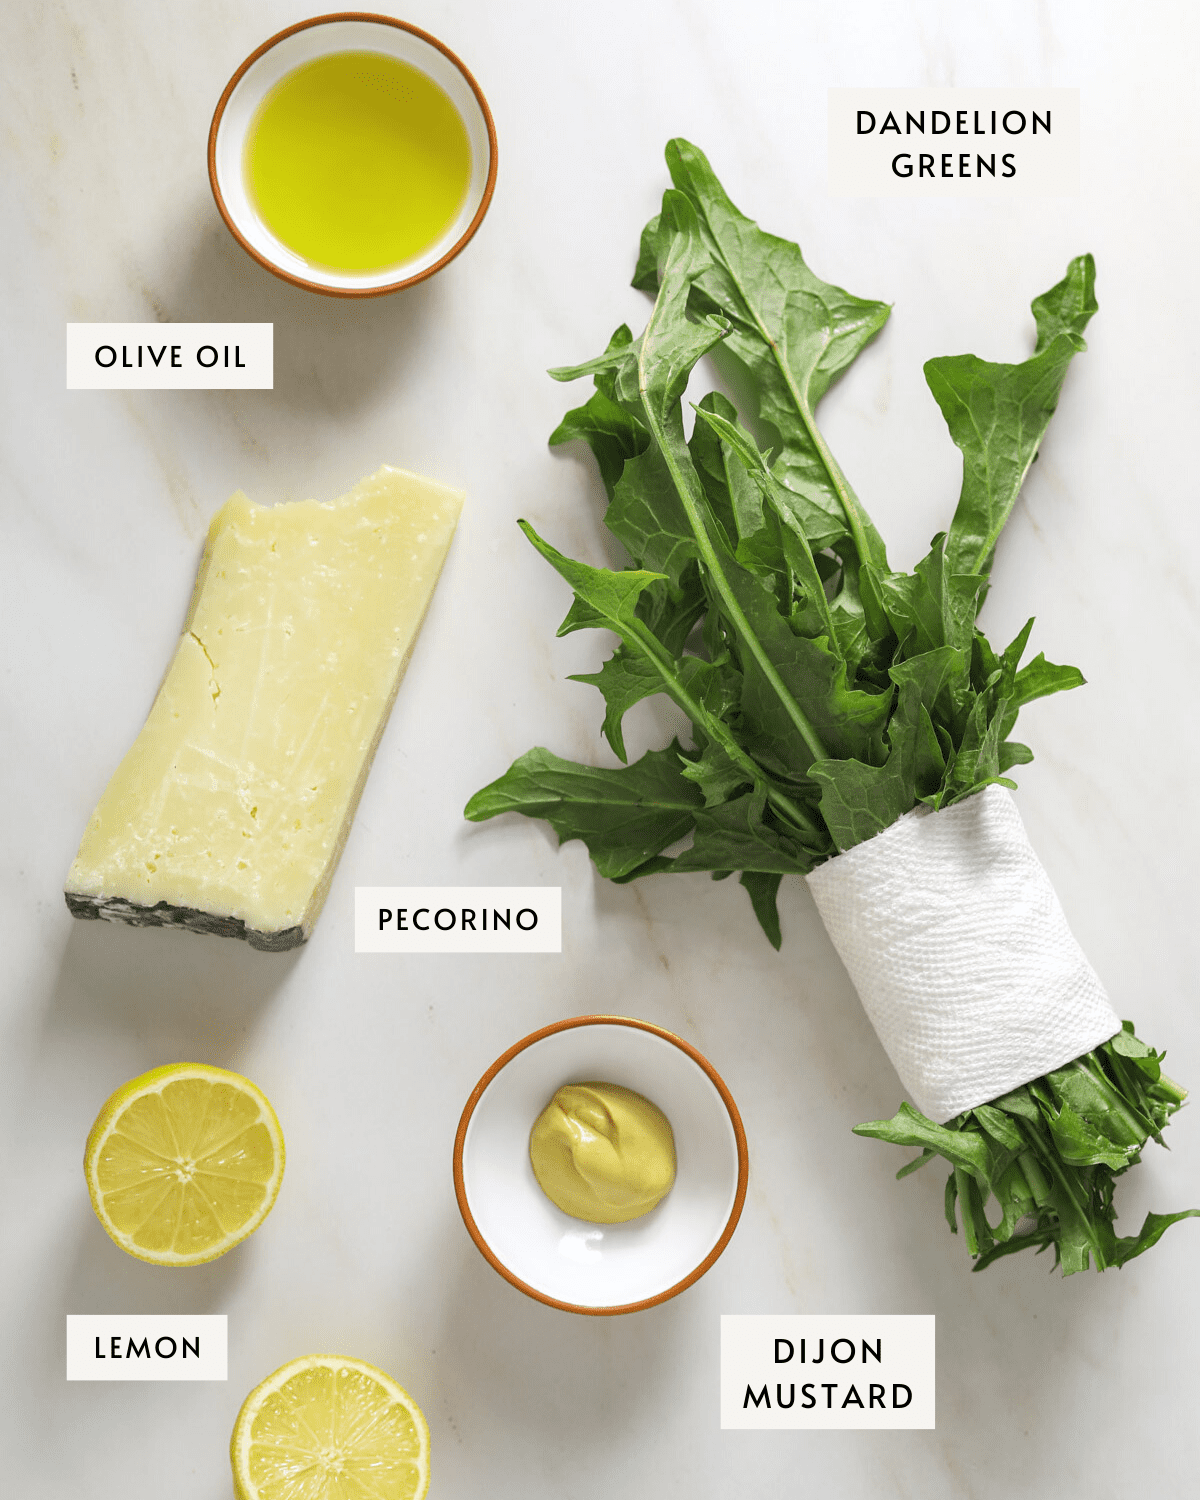 a chunk of pecorino cheese, a bowl of olive oil, a bundle of dandelion greens, a lemon sliced in half, a small dish of dijon mustard.